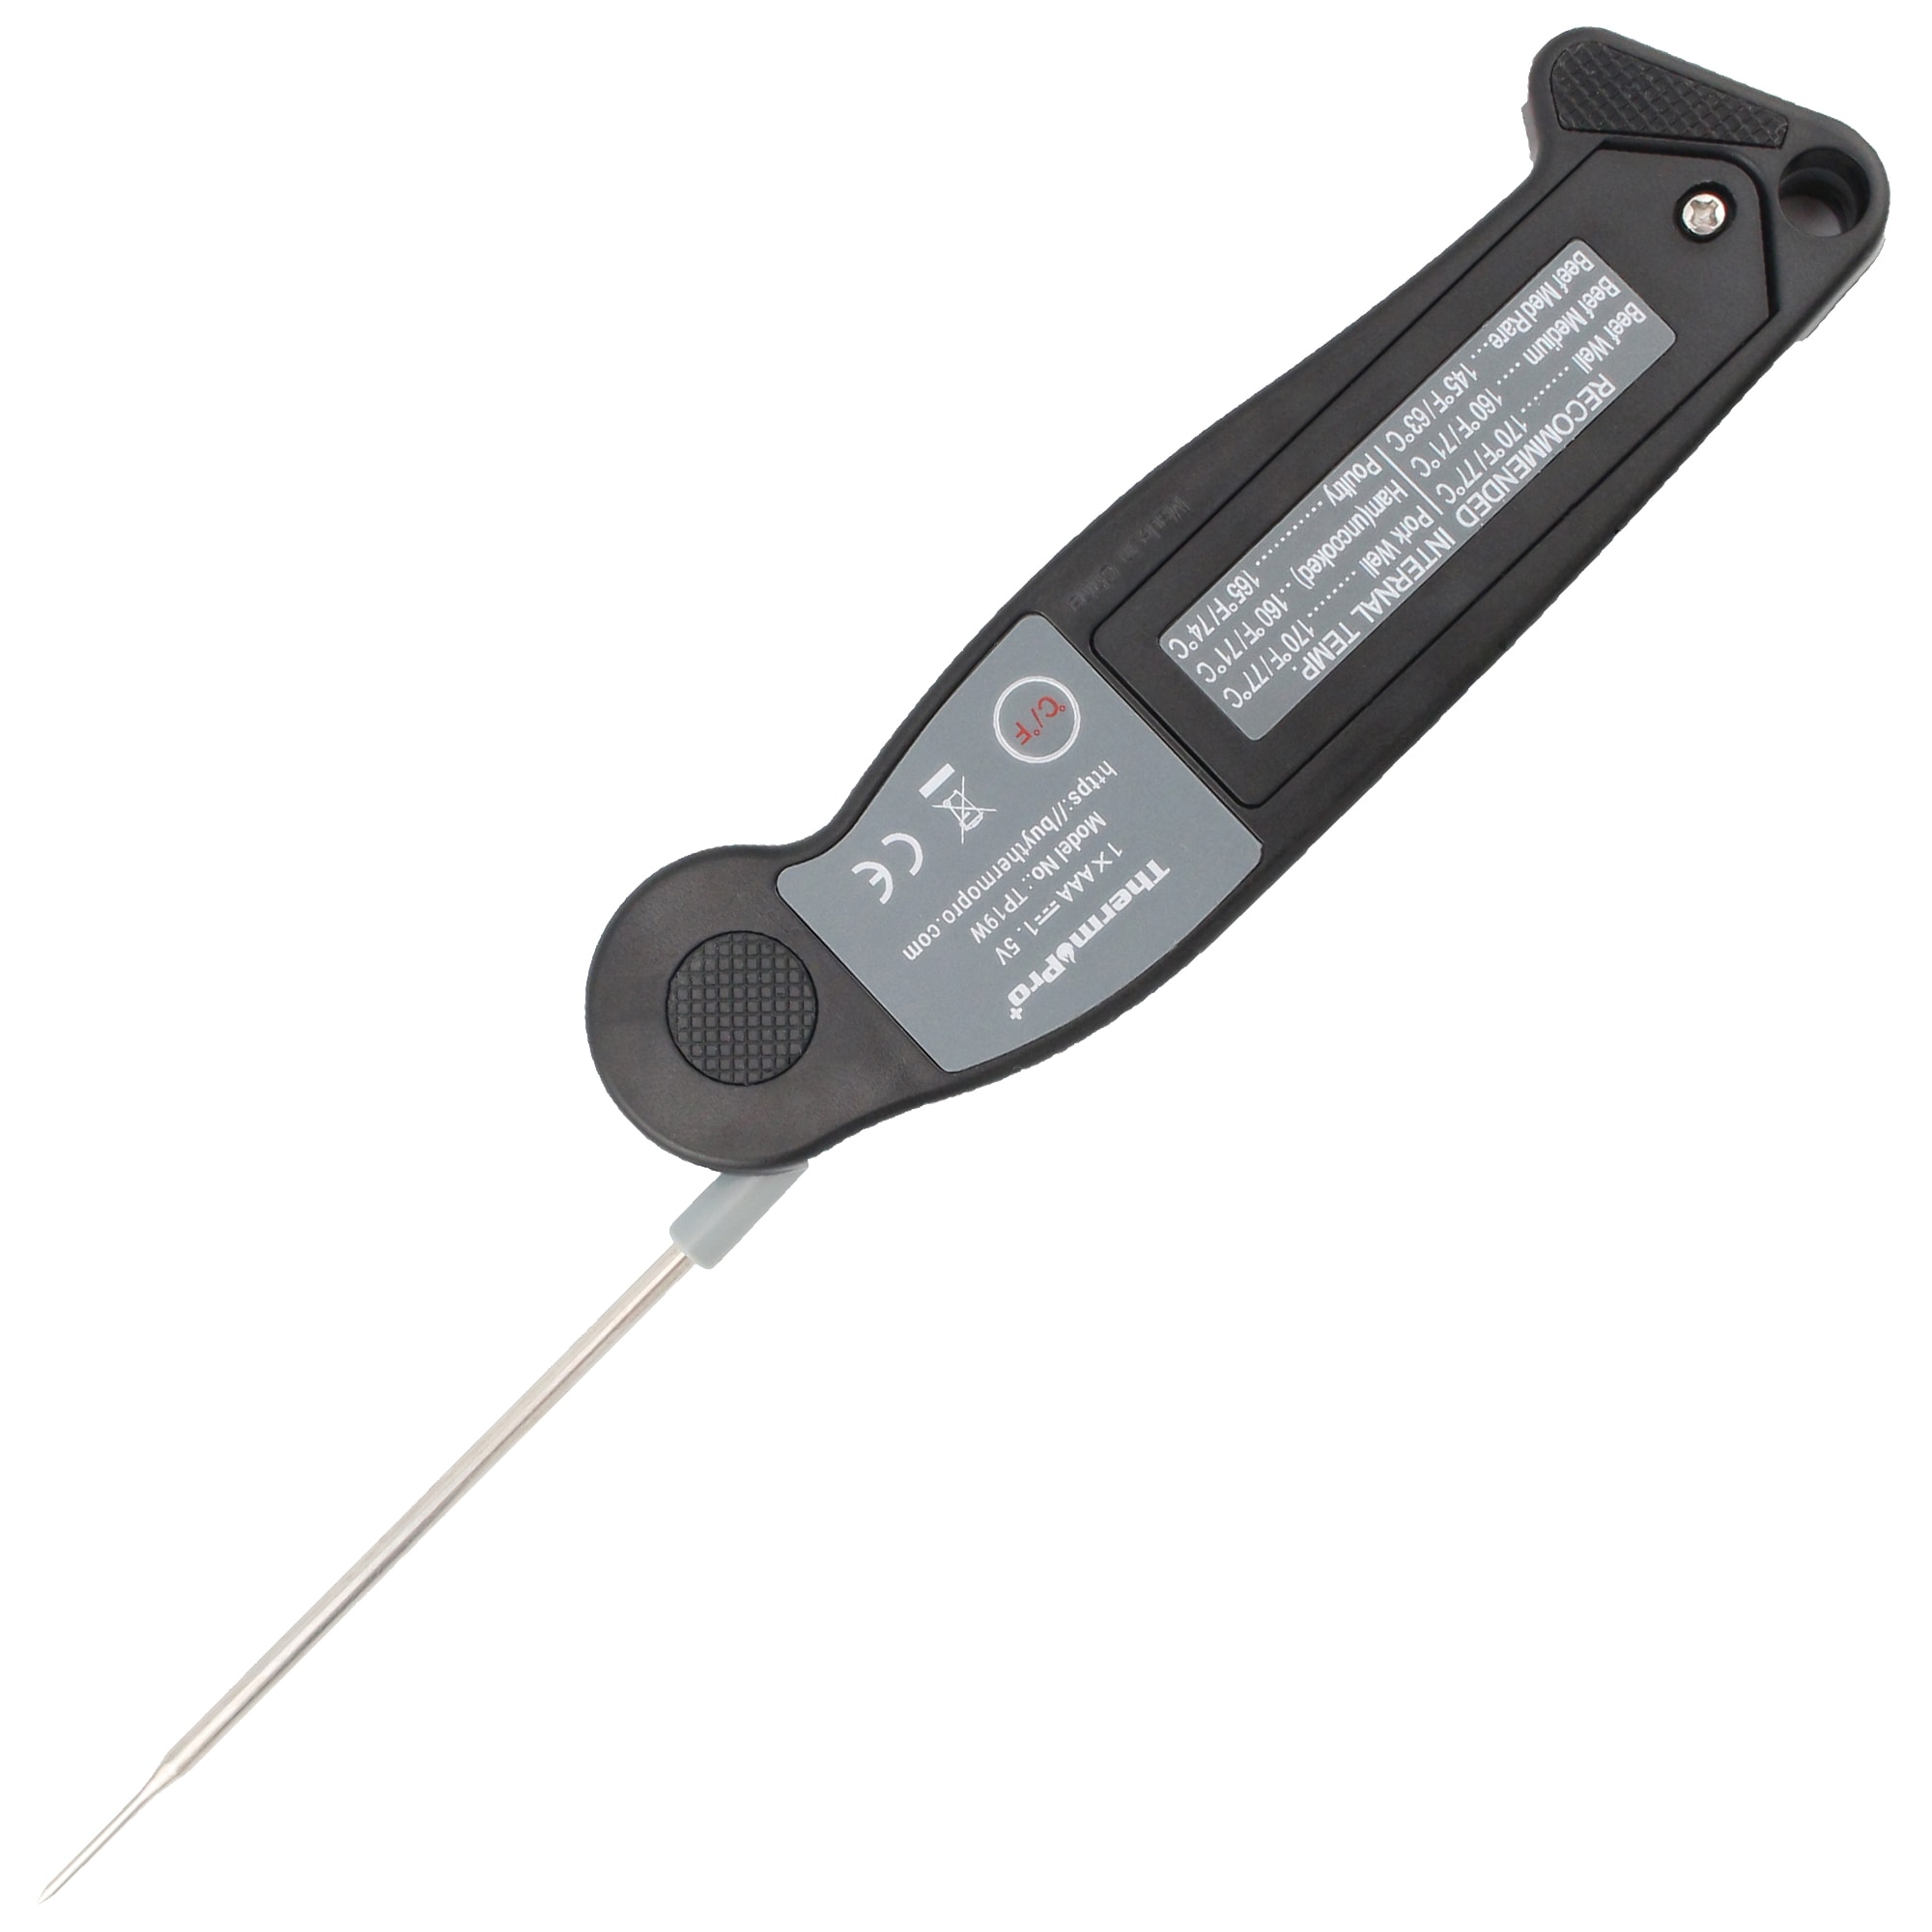 ThermoPro TP19X Instant Read Meat Thermometer